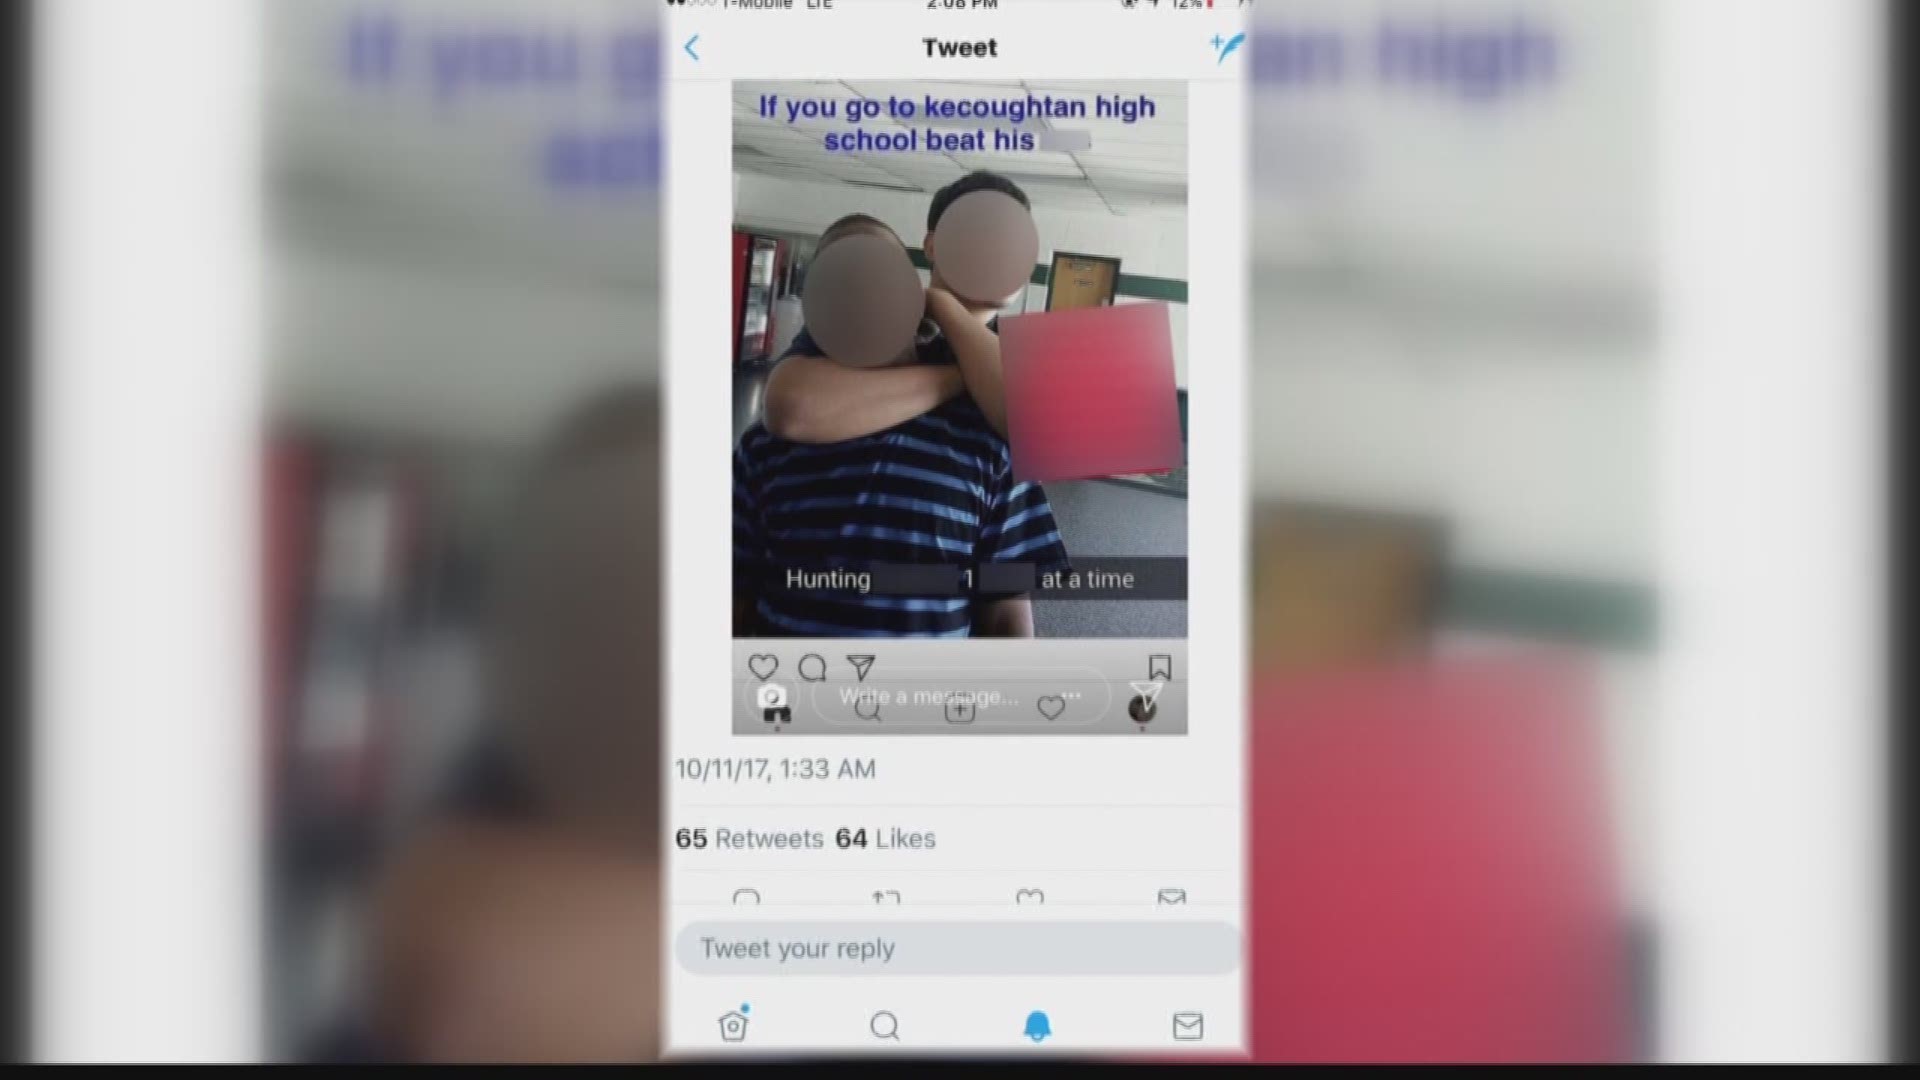 A post featuring a black student in a headlock with racial slurs prompted an investigation by Hampton City Schools.